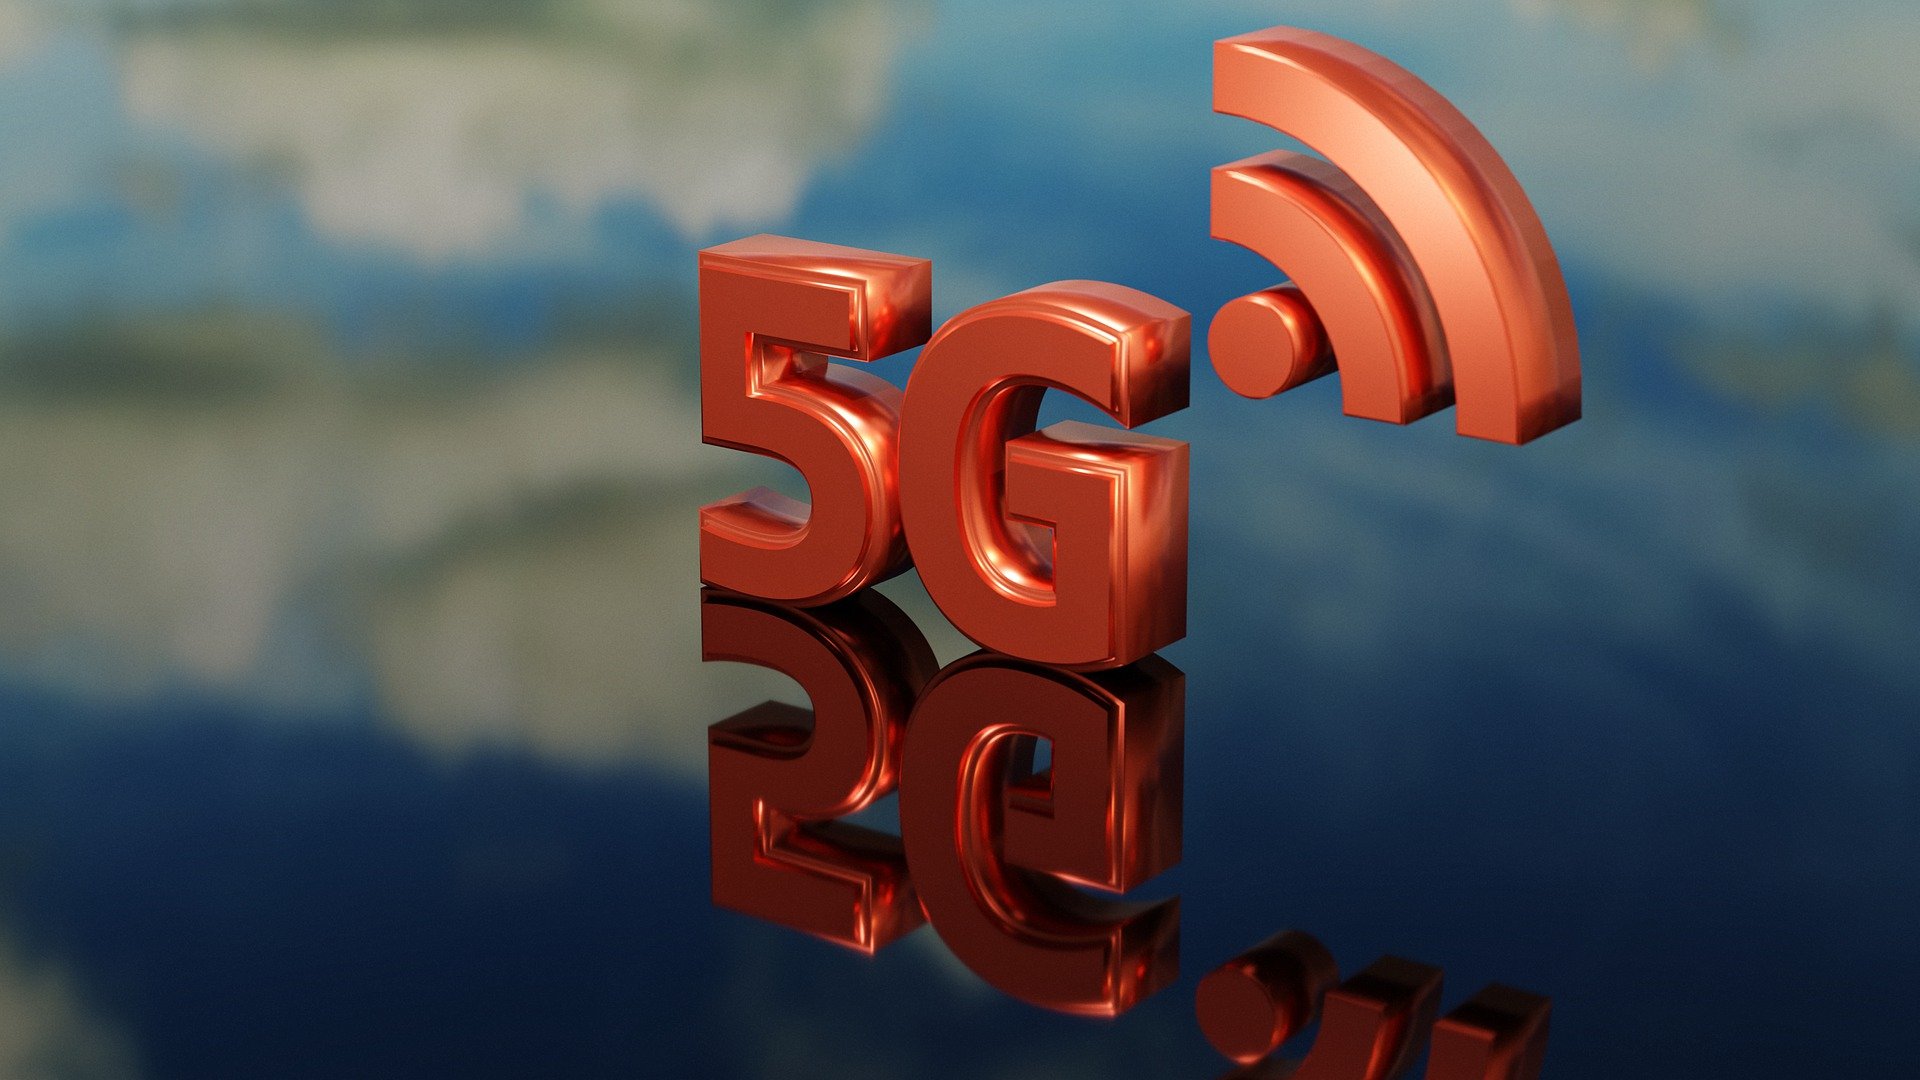 Electronic Load Market to Gain Traction; Increasing Investments in Wireless Communication for the 5G Network - MarketsandMarkets Blog